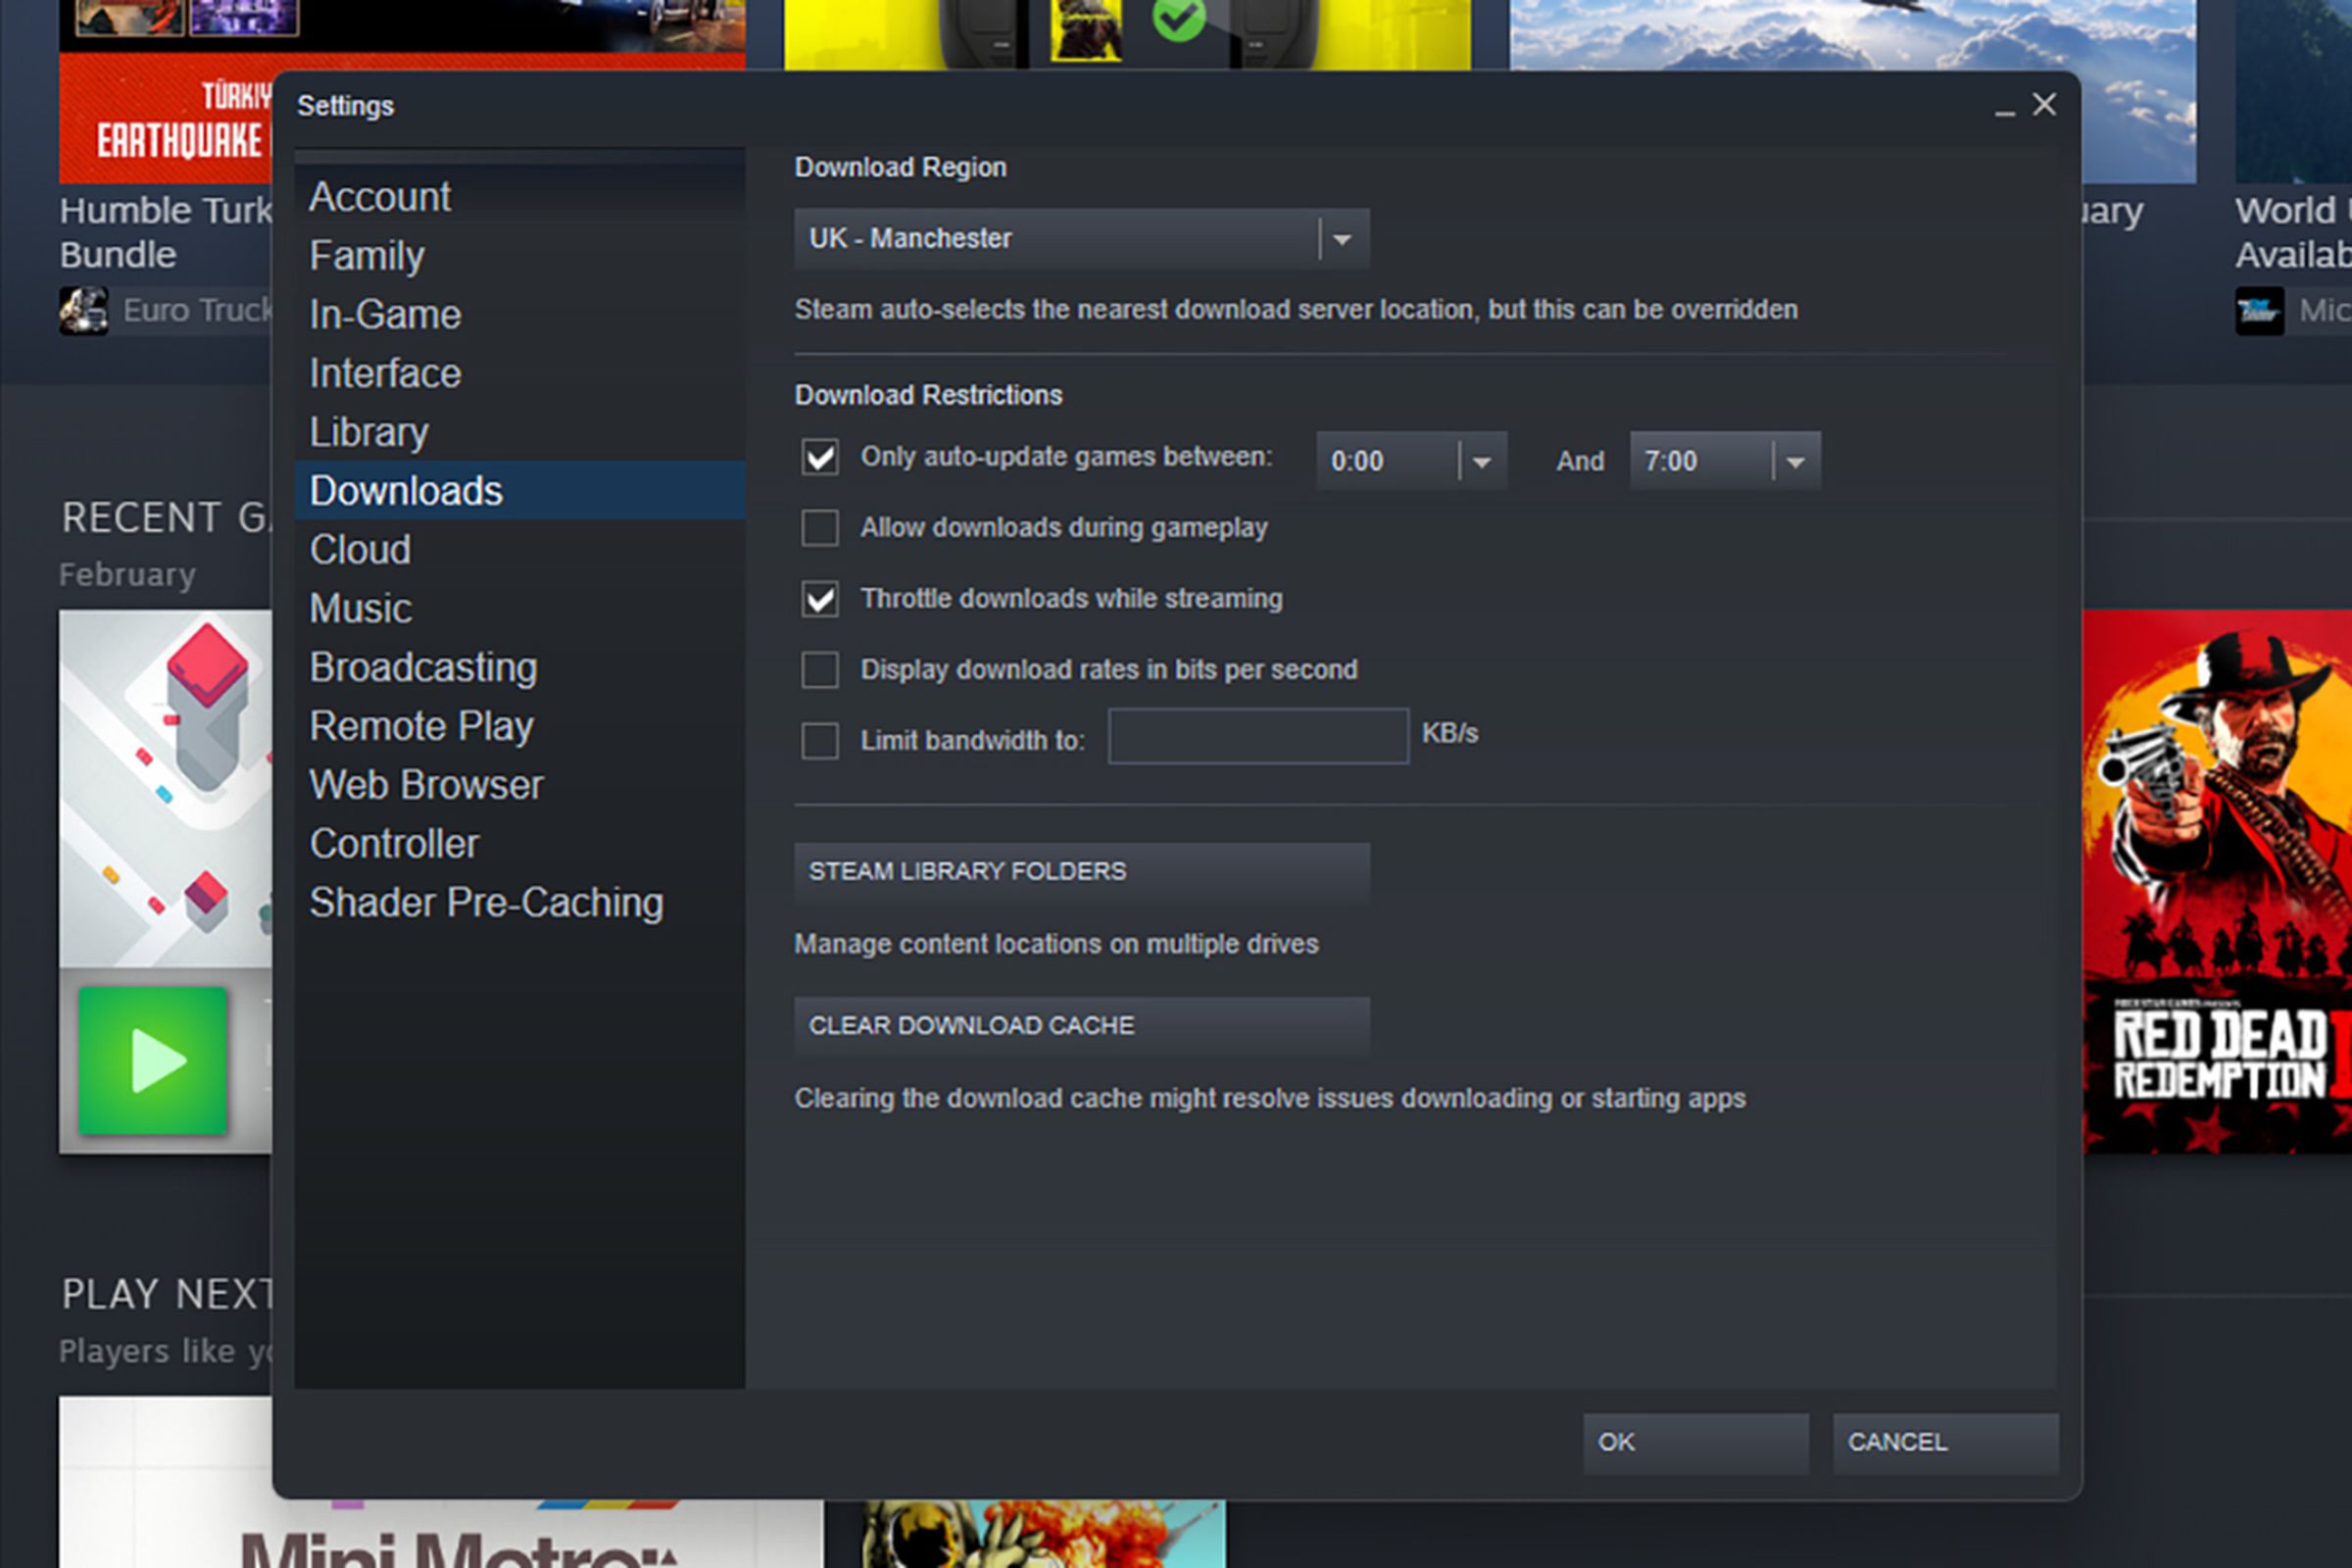 Steam web page with download options; two are checked: Only auto update games between 0:00 and 7:00, and Throttle downloads while streaming.